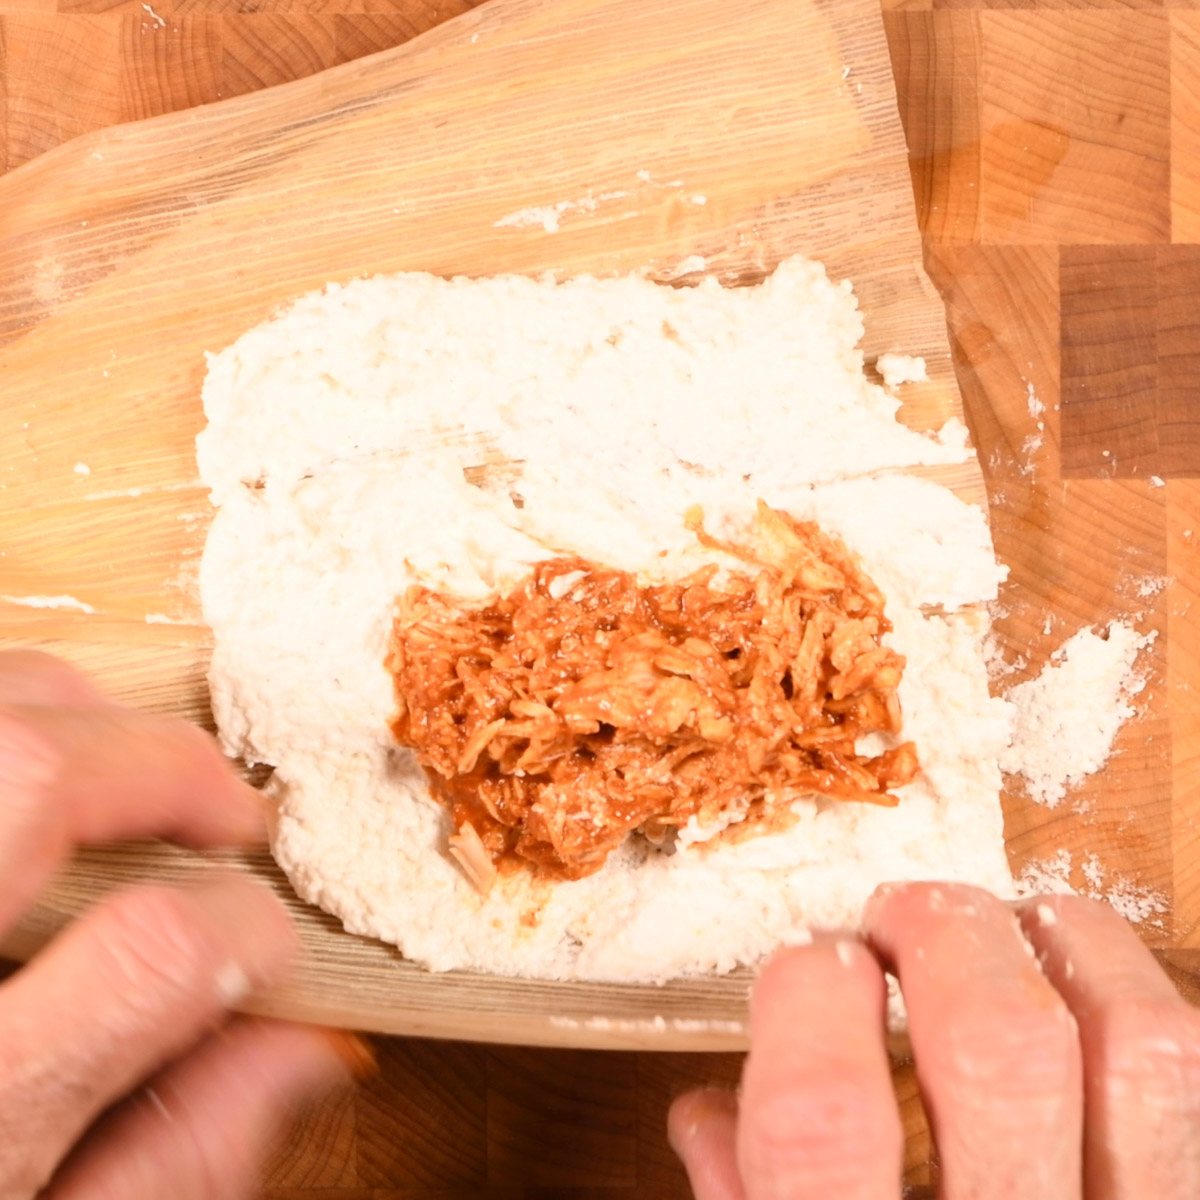 Add a scoop of chicken and birria sauce and fold the tamale.